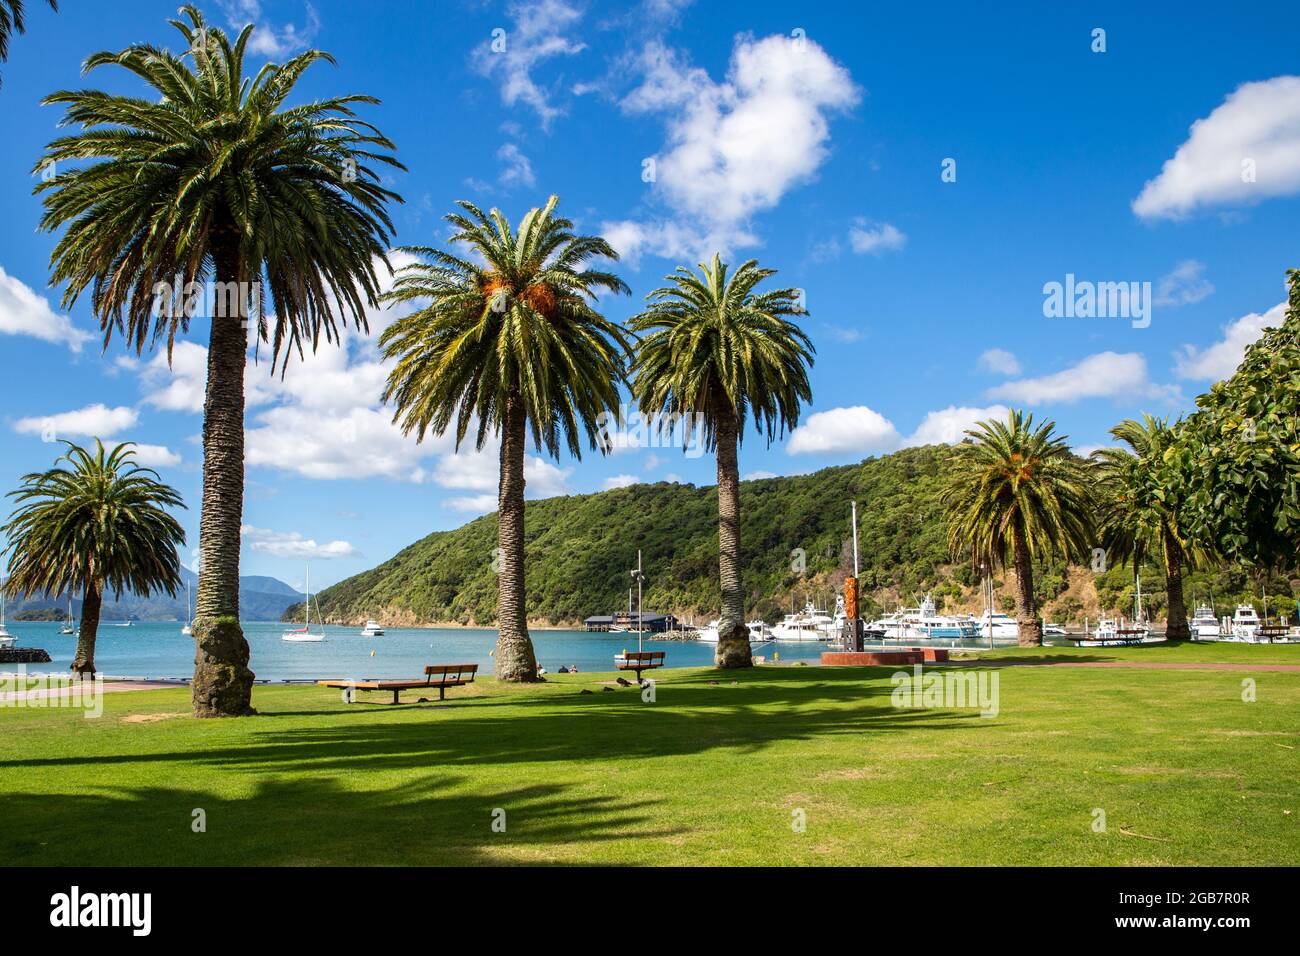 The view out into the bay from the Picton waterfront is beautiful, lined with nikau palms and is a scenic place to wait for the ferry. Picton, NZ Stock Photo